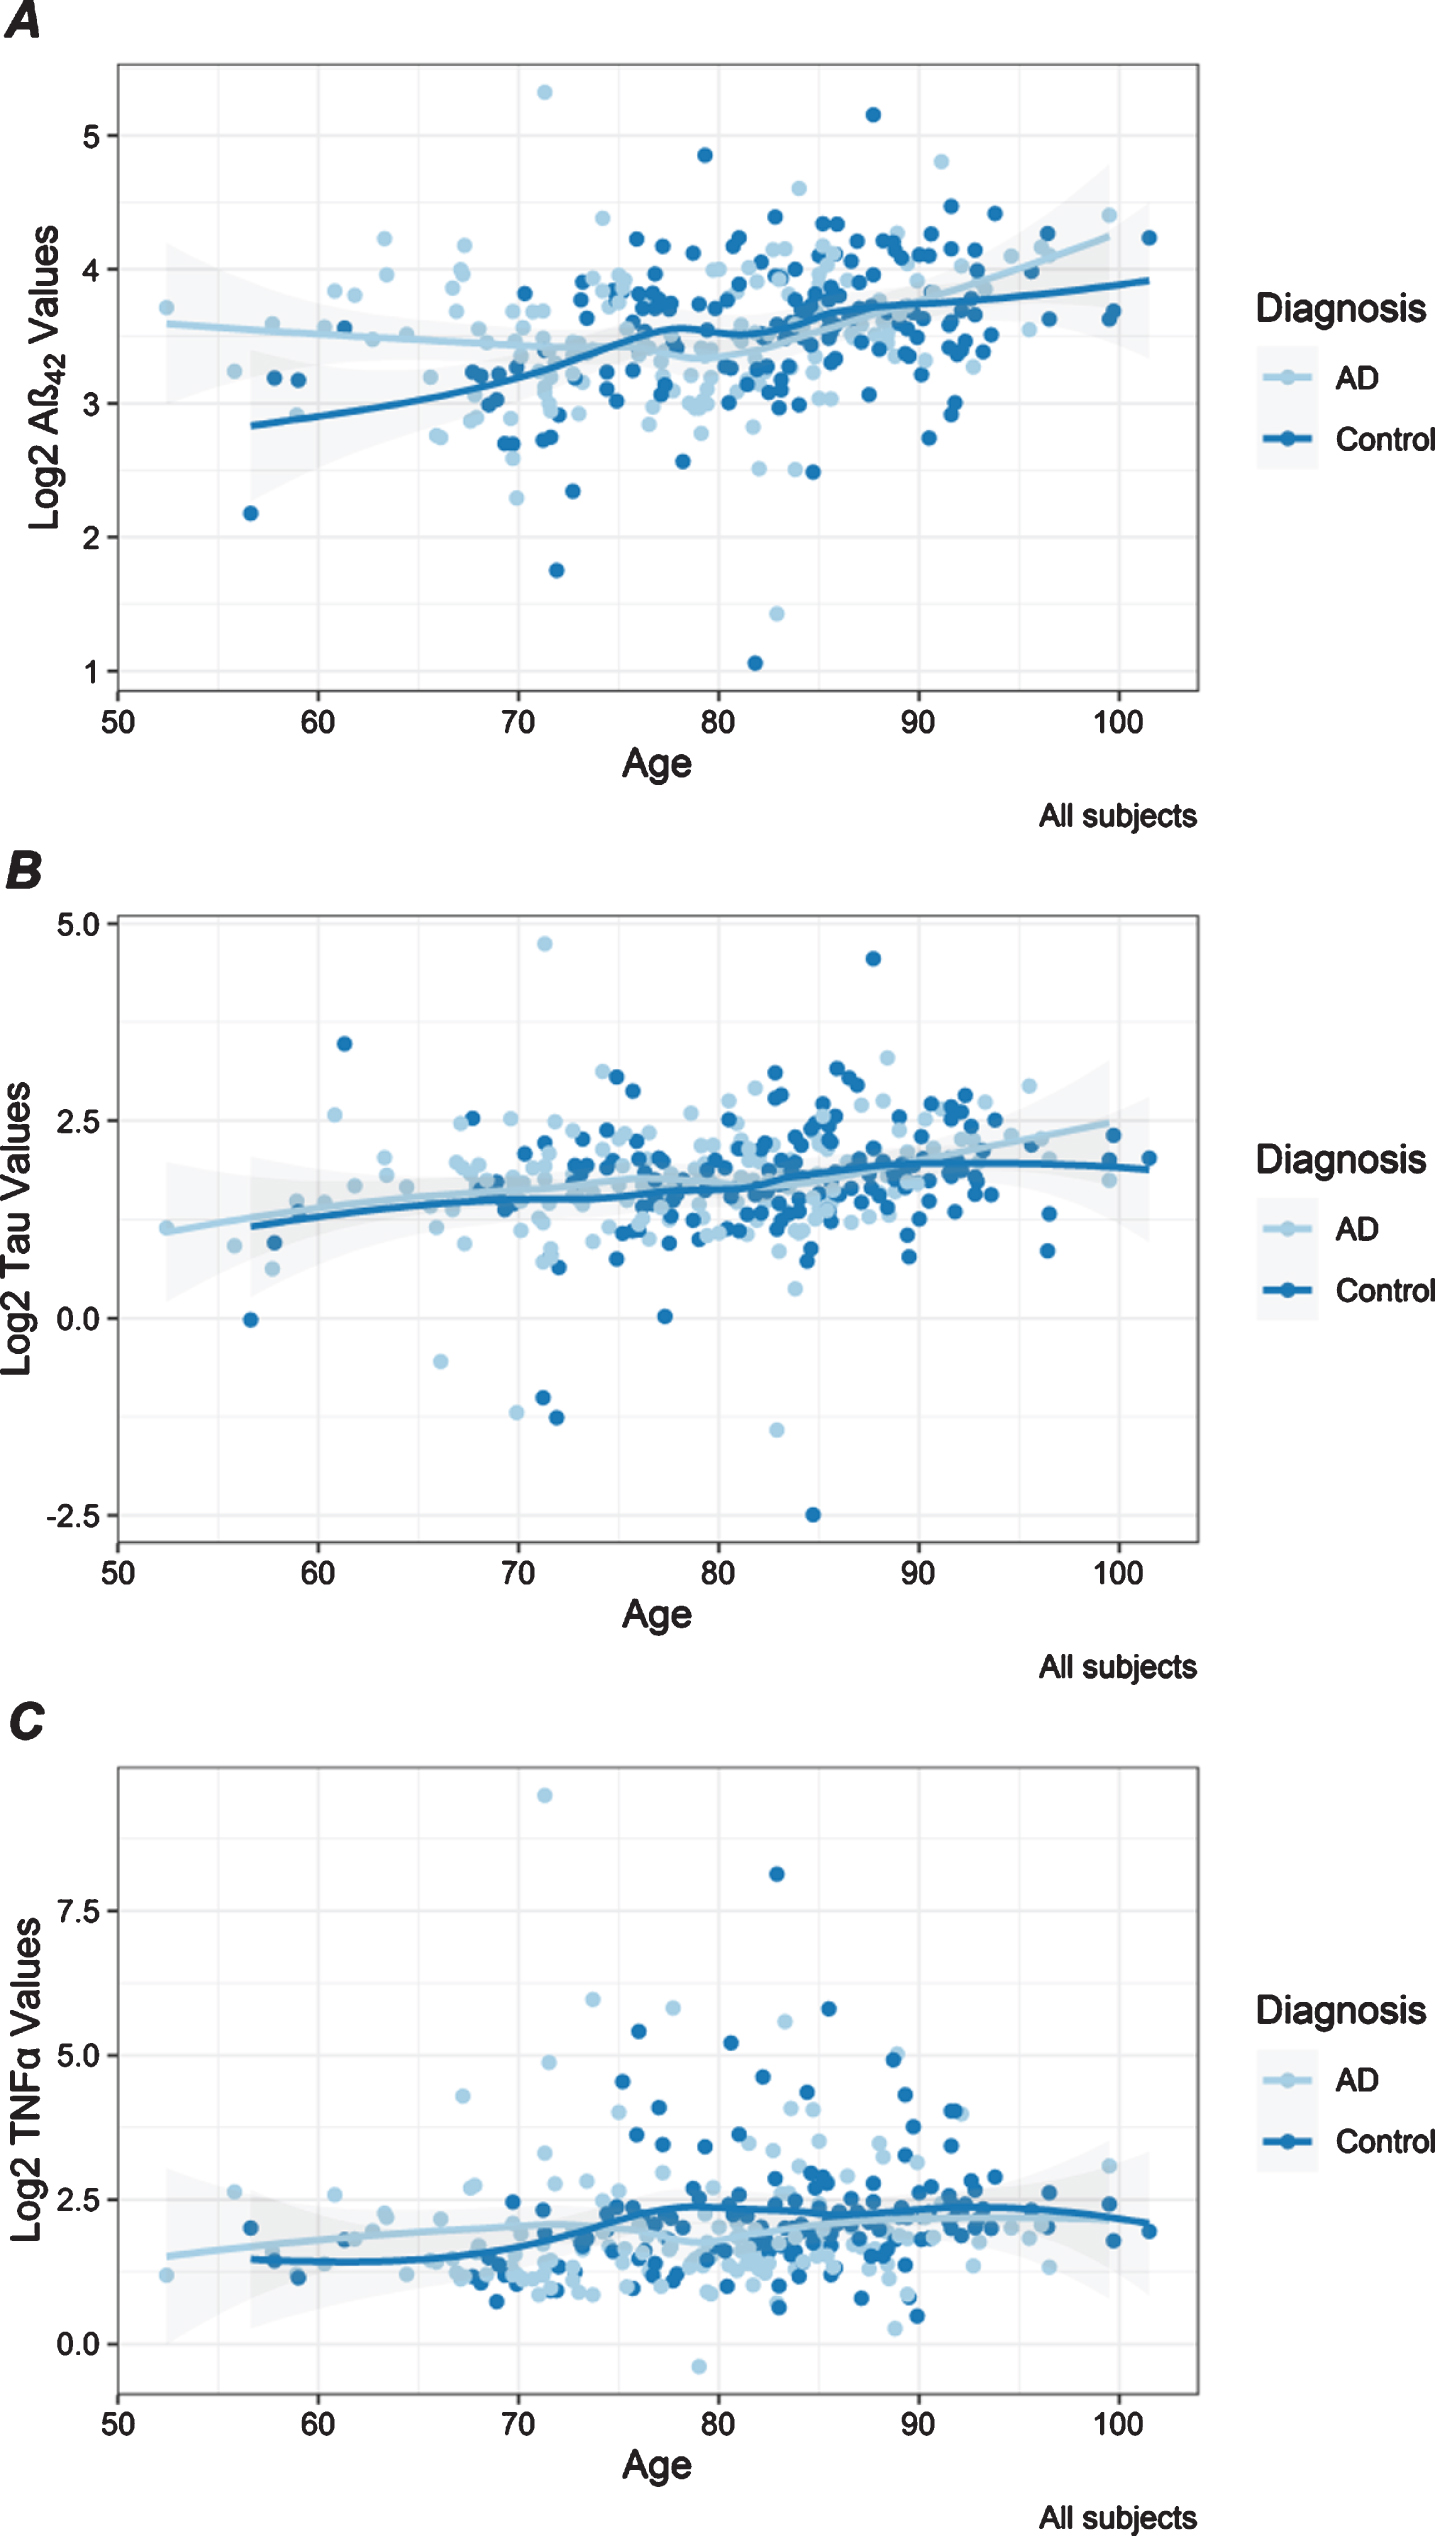 Distribution of plasma protein levels by age. Scatter plots are shown for Aβ42 (A), tau (B), and TNFα (C) log2 transformed values that have statistically significant associations with age shown in Table 2. Each dot presents the level for a unique individual. Lines are drawn with the loess smoother function and gray bands represent confidence intervals. Results are color-coded for participants with AD (light blue) and controls (dark blue).